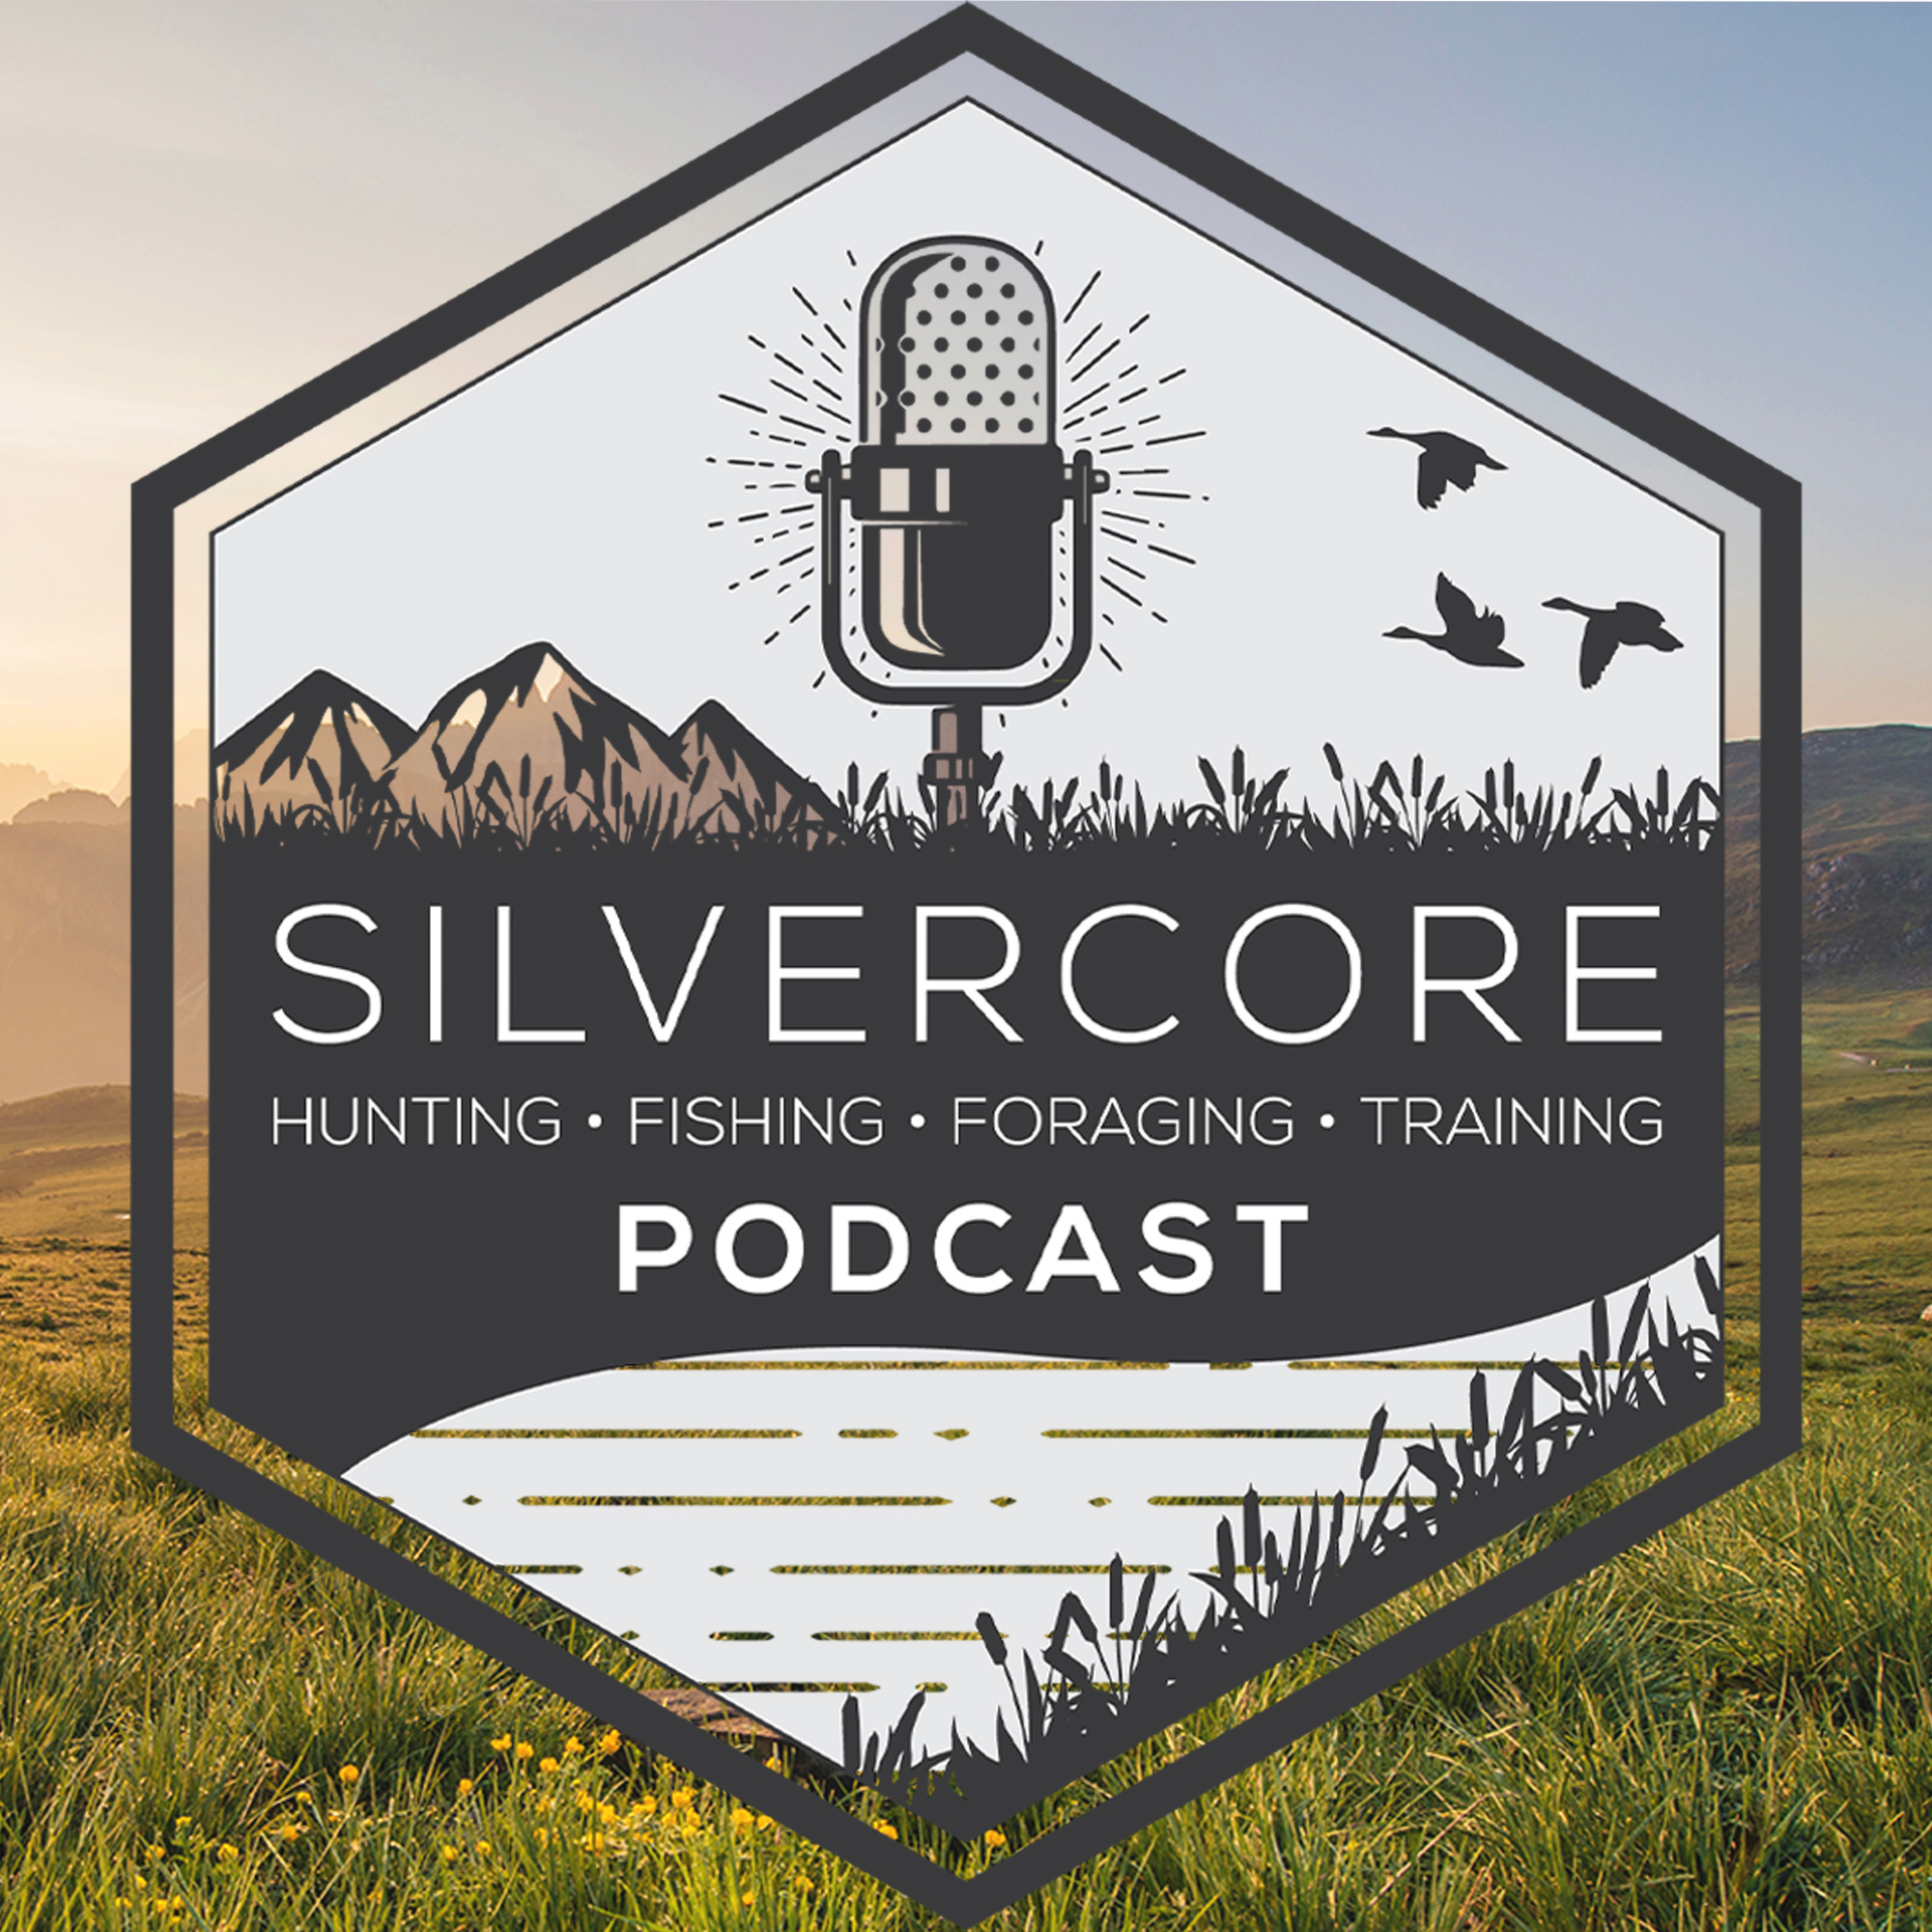 The Silvercore Podcast podcast show image